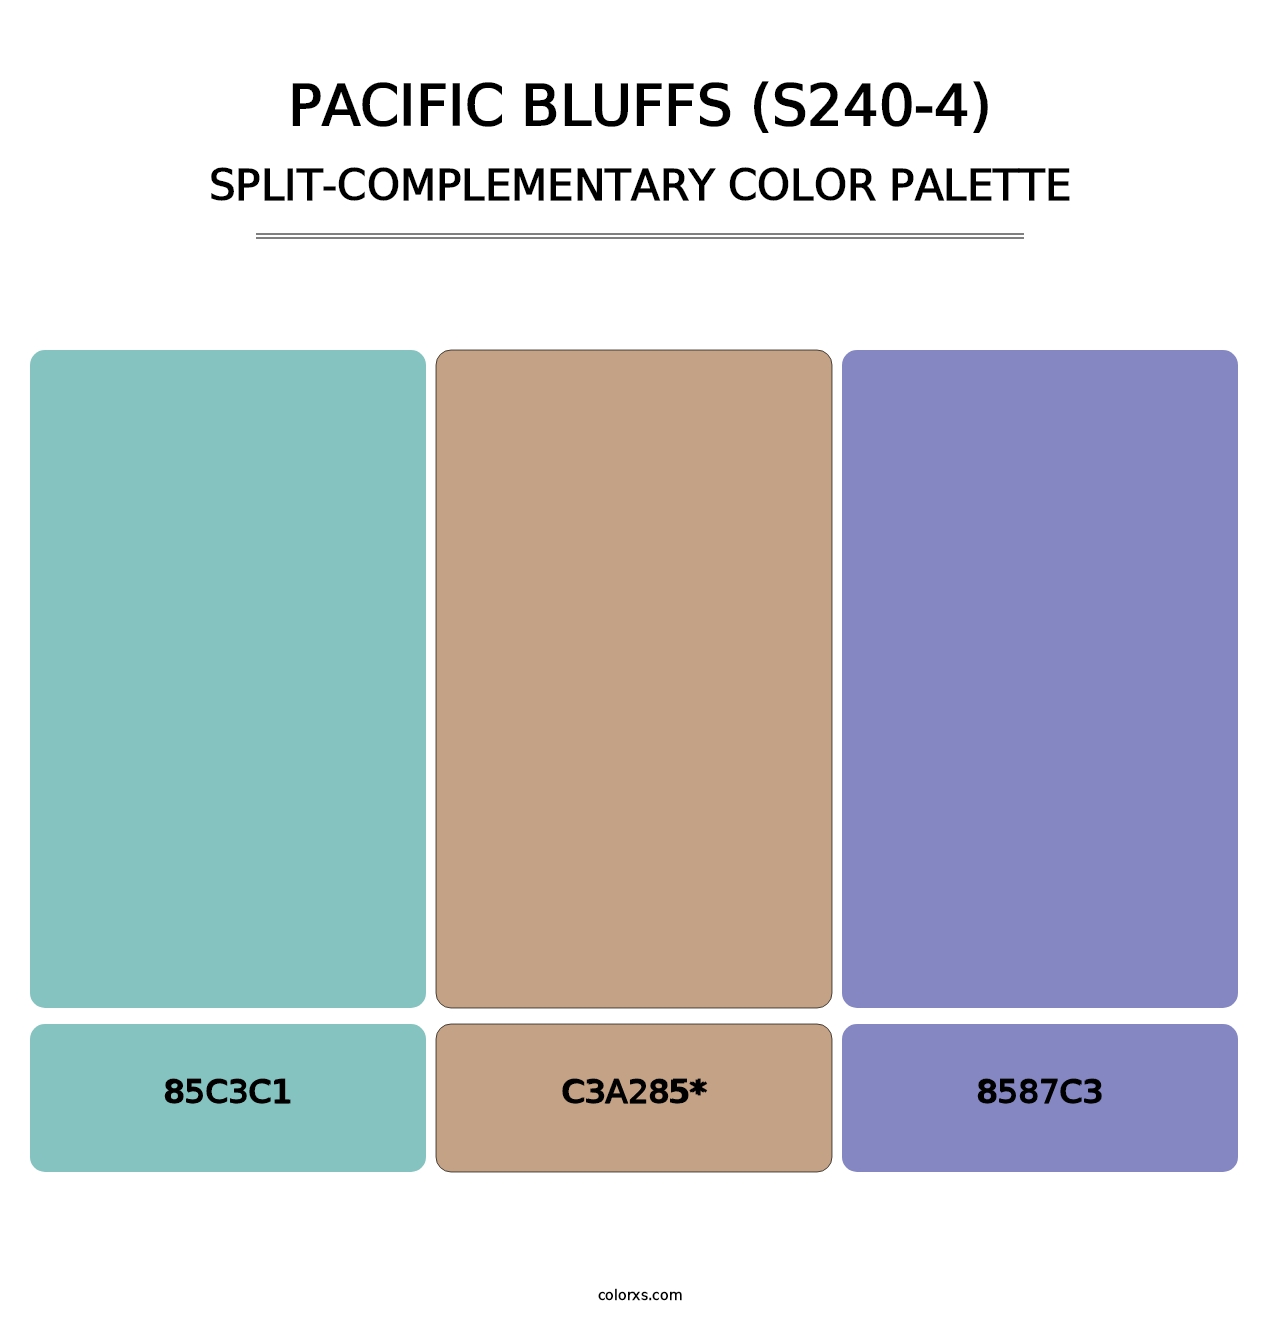 Pacific Bluffs (S240-4) - Split-Complementary Color Palette